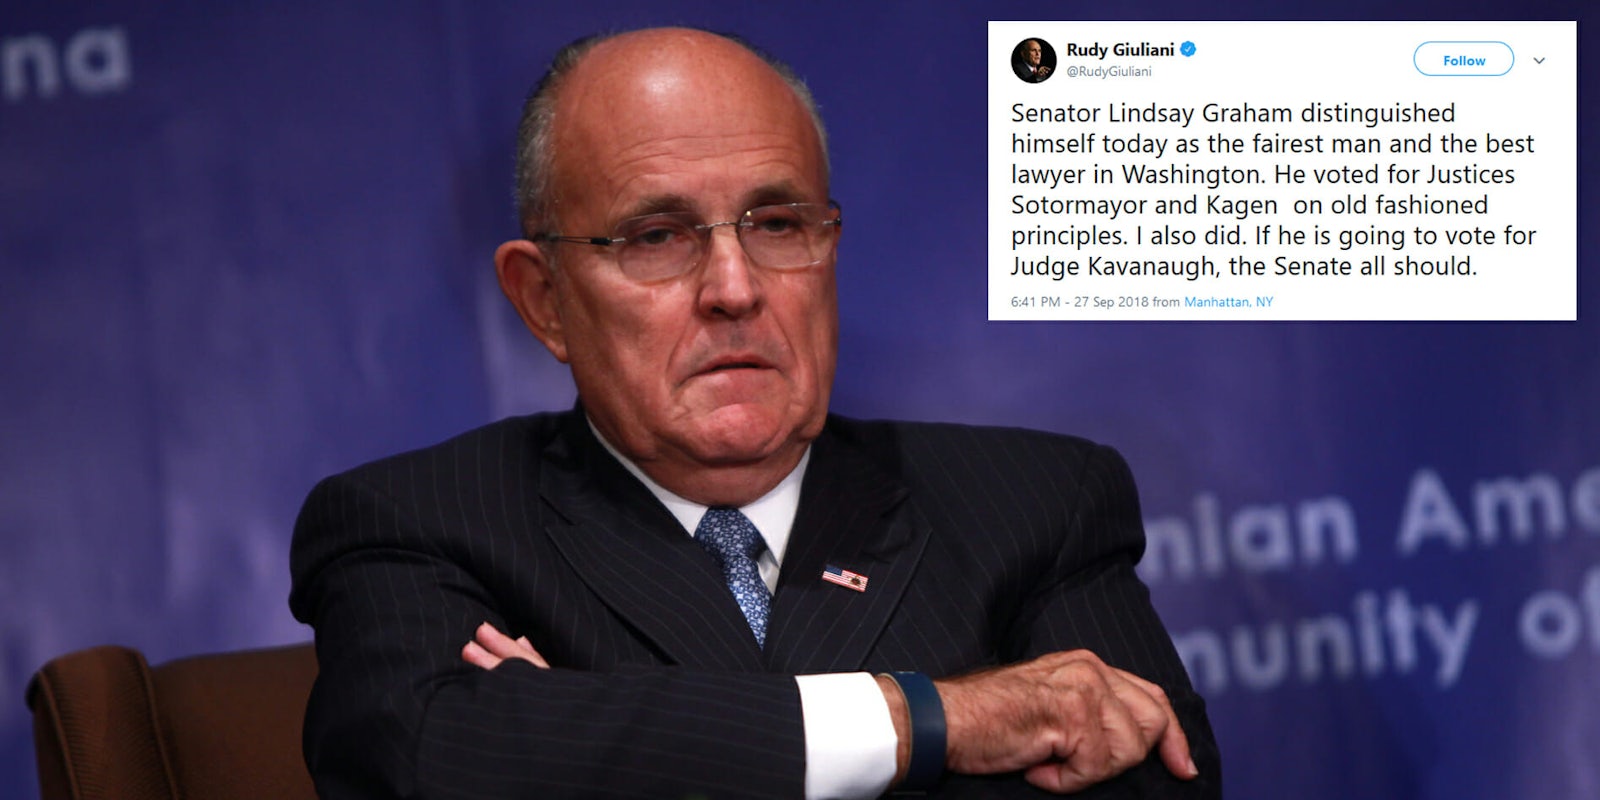 Rudy Giuliani misspelled the names of two Supreme Court justices and a senator when defending Brett Kavanaugh in a tweet.